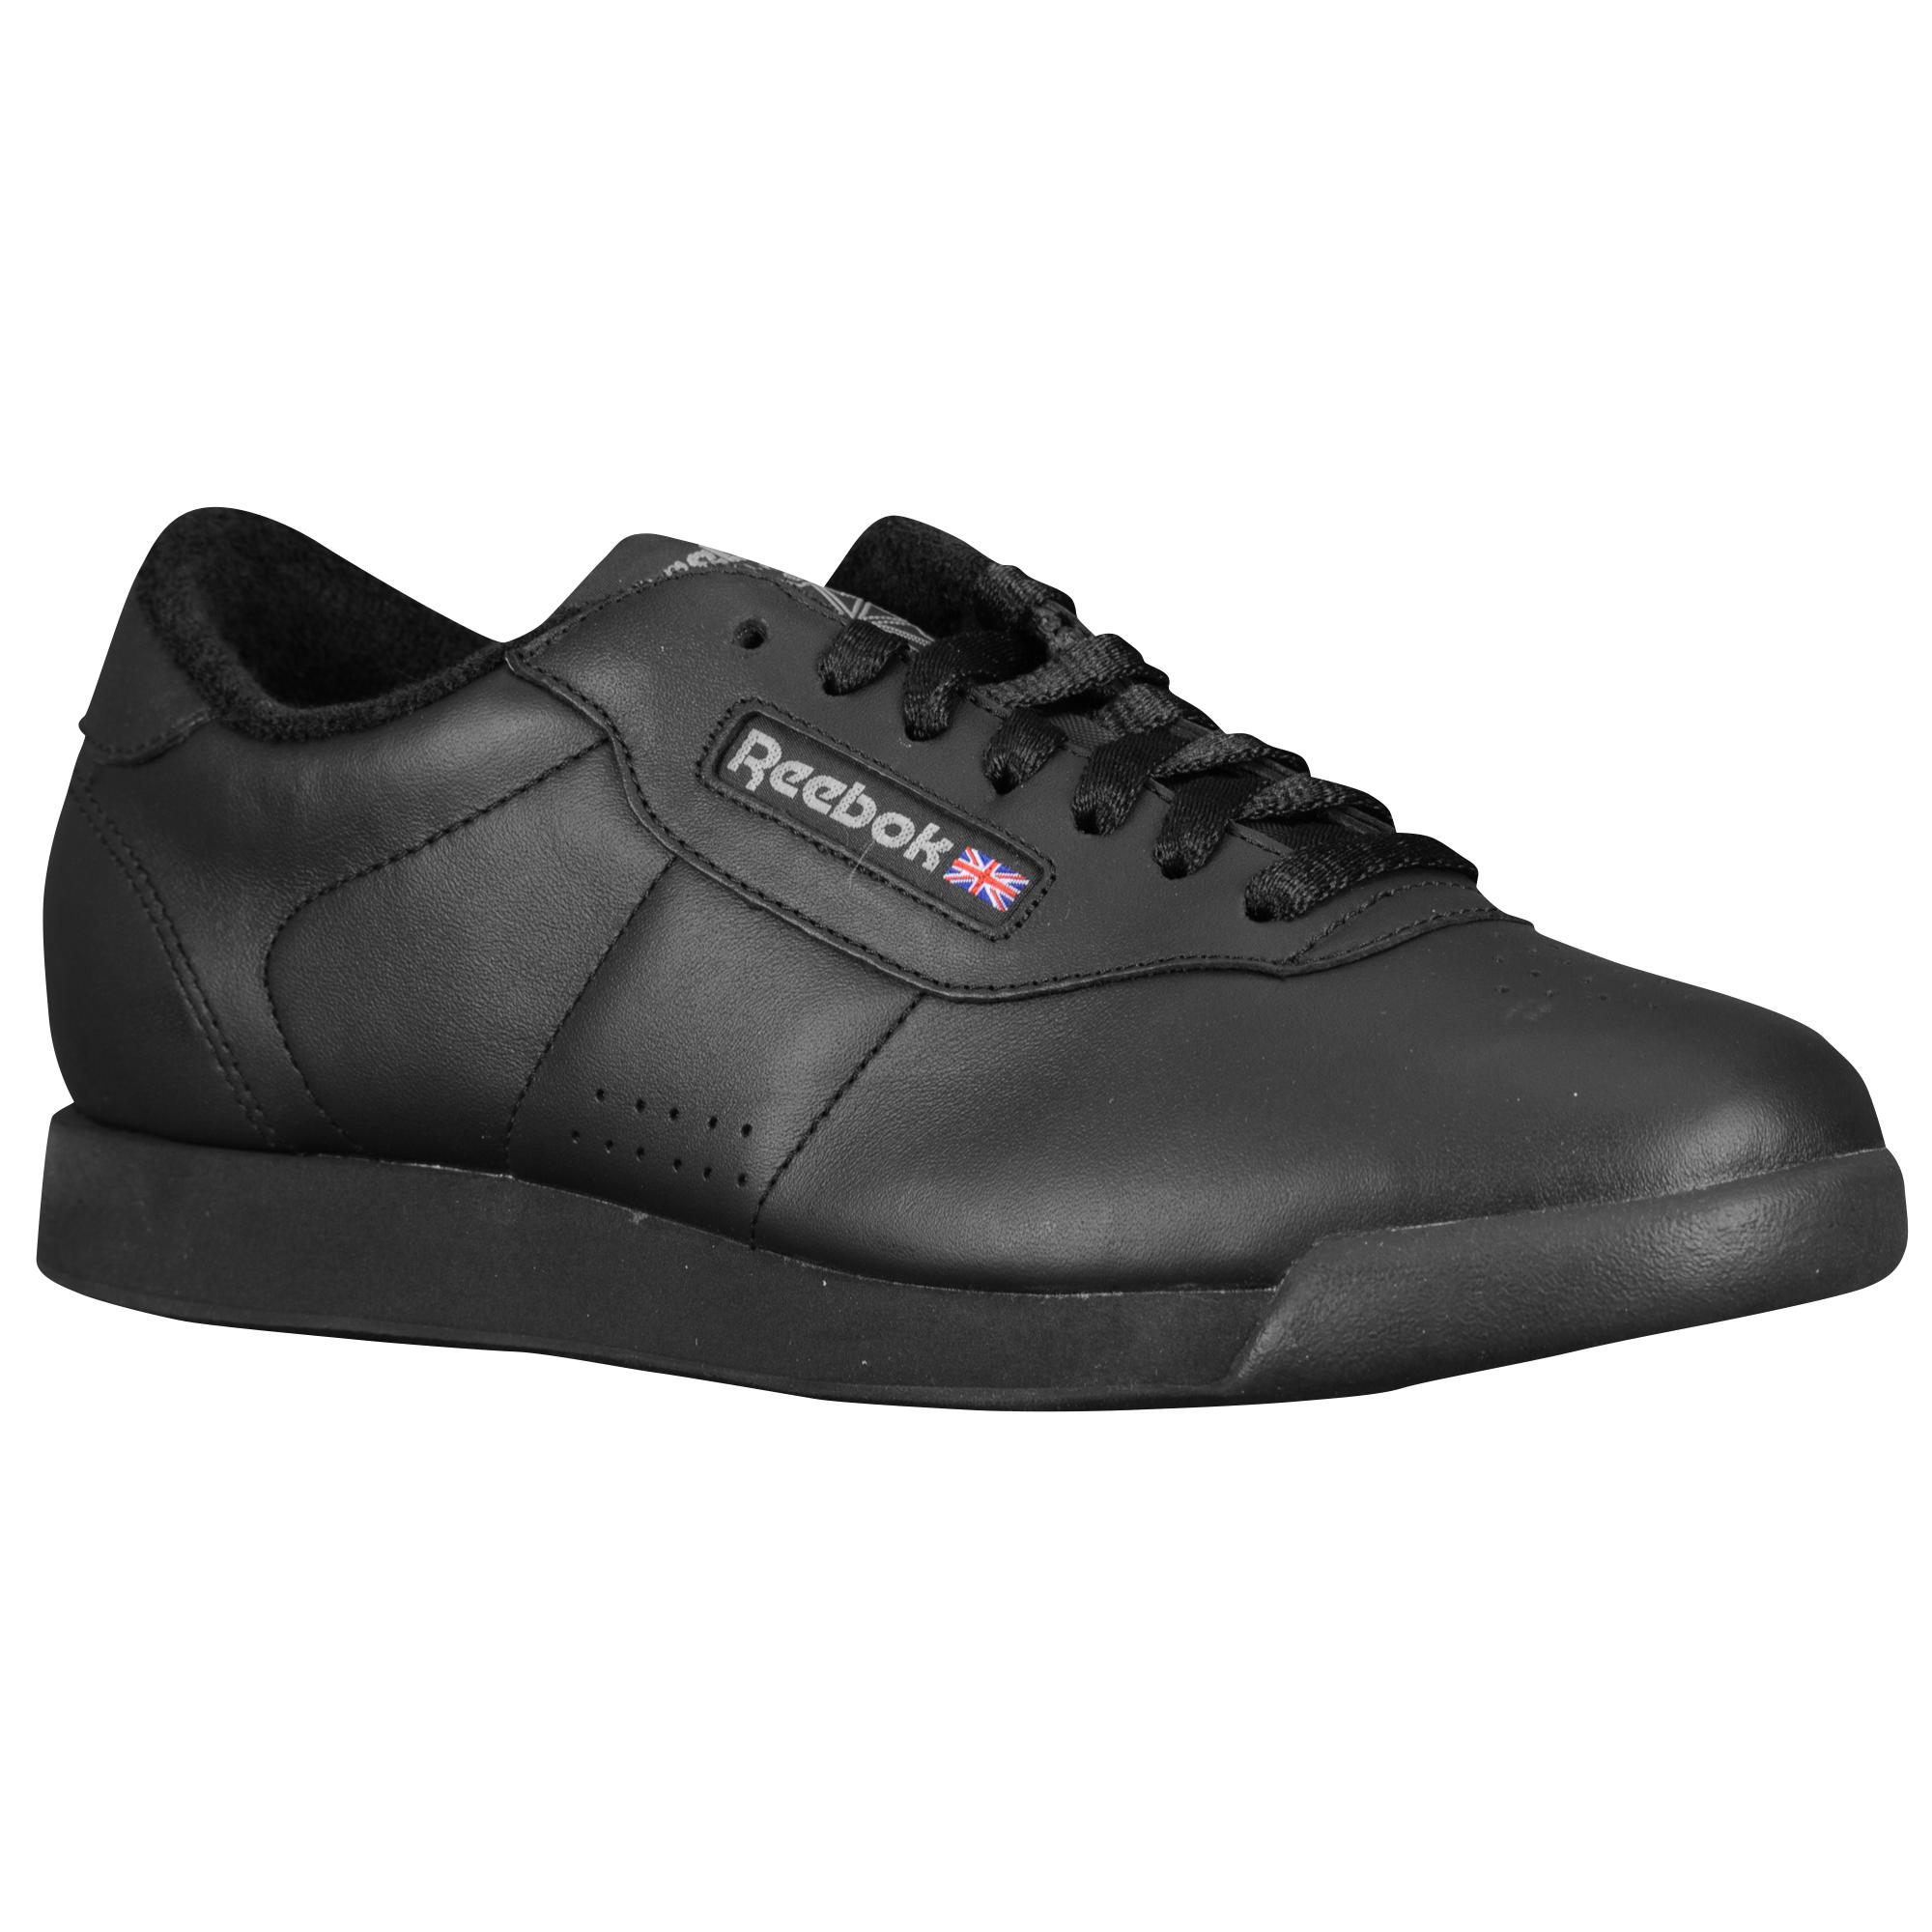 Reebok Synthetic Princess Training Shoes in Black - Lyst